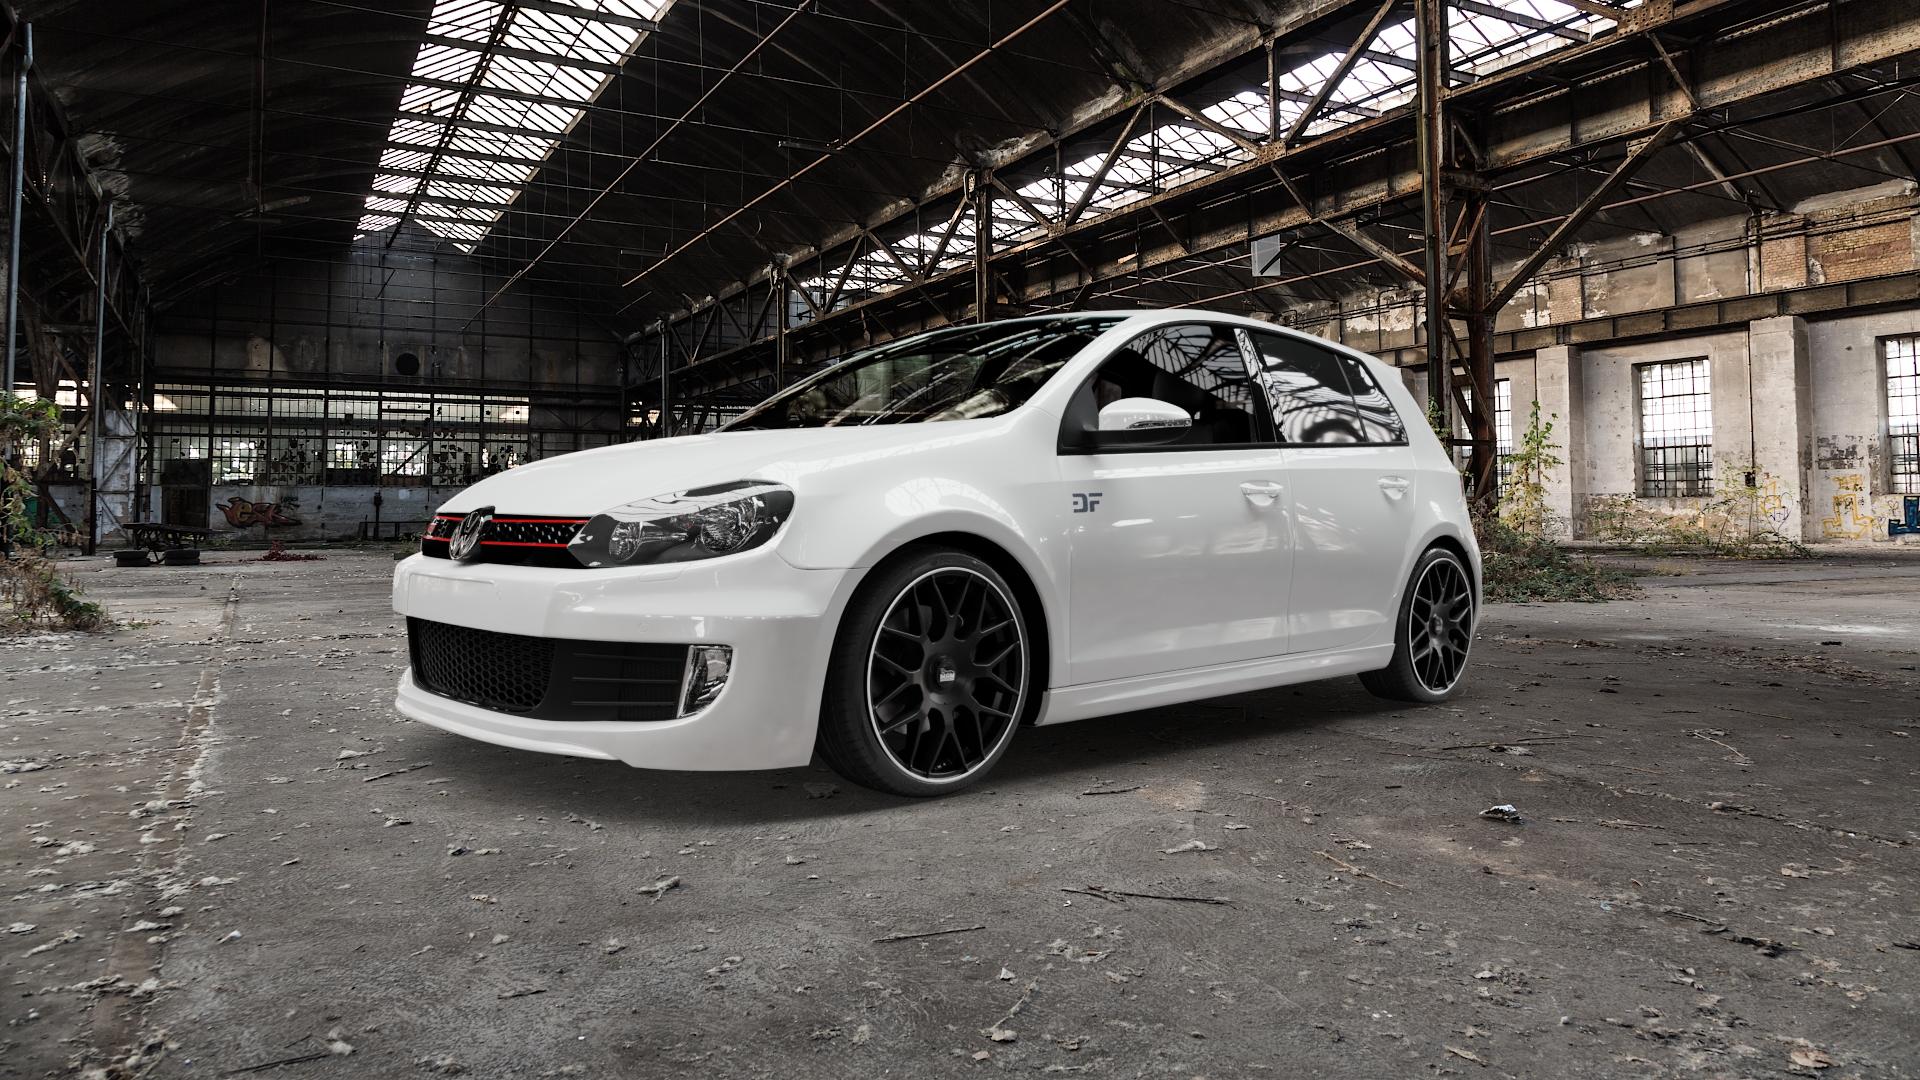 Volkswagen (VW) Golf 6 2,0l Turbo GTI Edition 35 173kW (235 hp) Wheels and  Tyre Packages